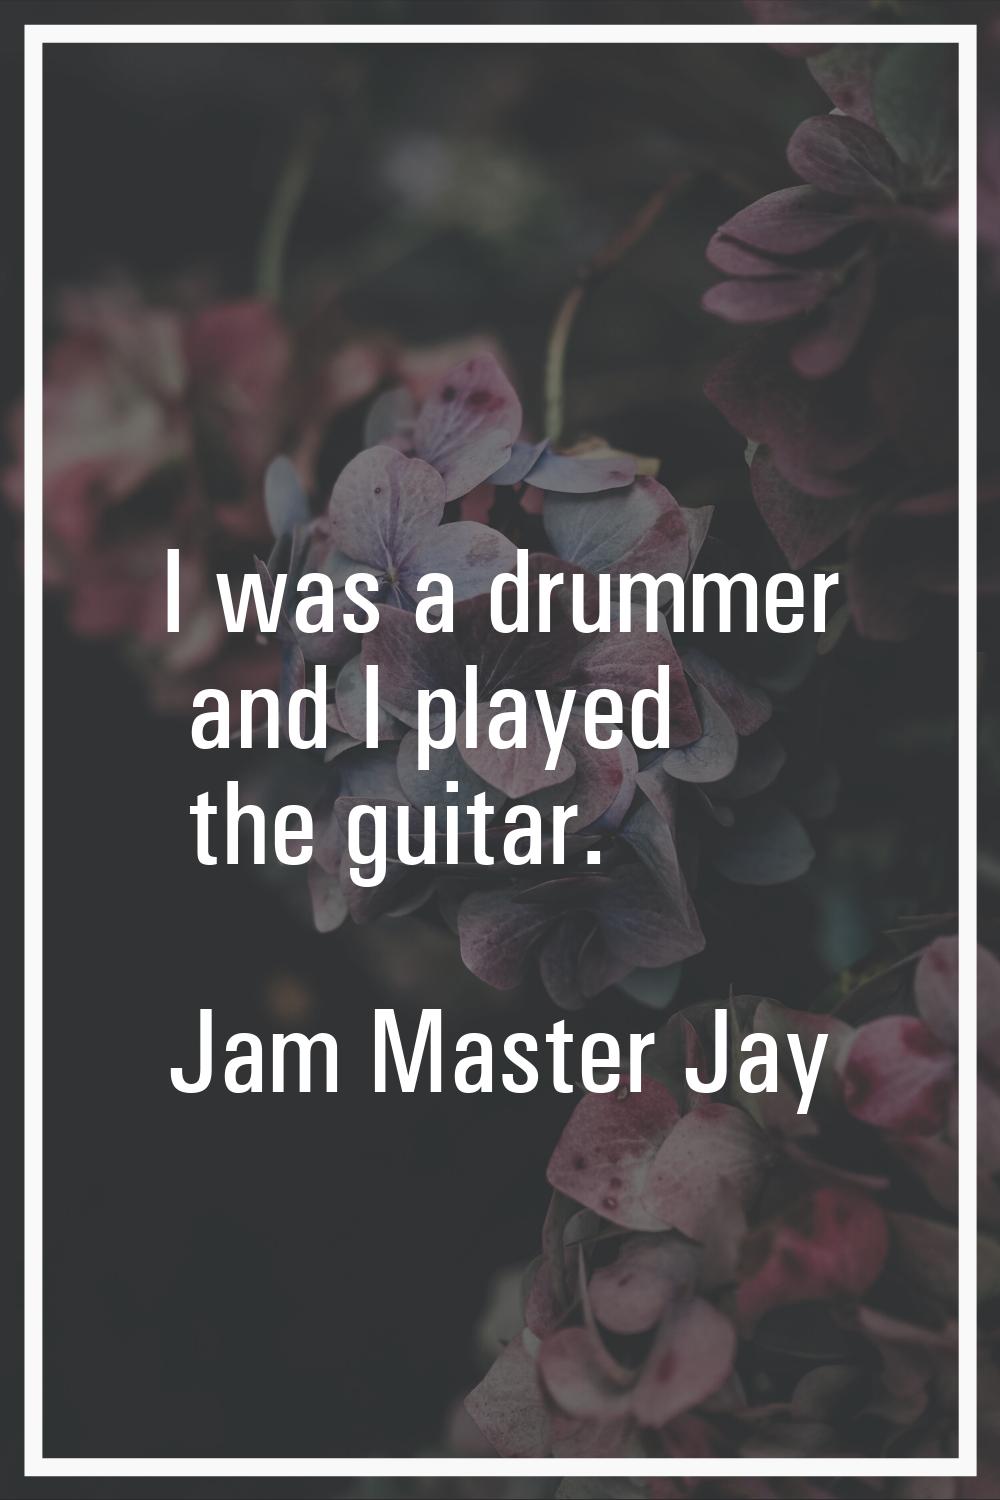 I was a drummer and I played the guitar.